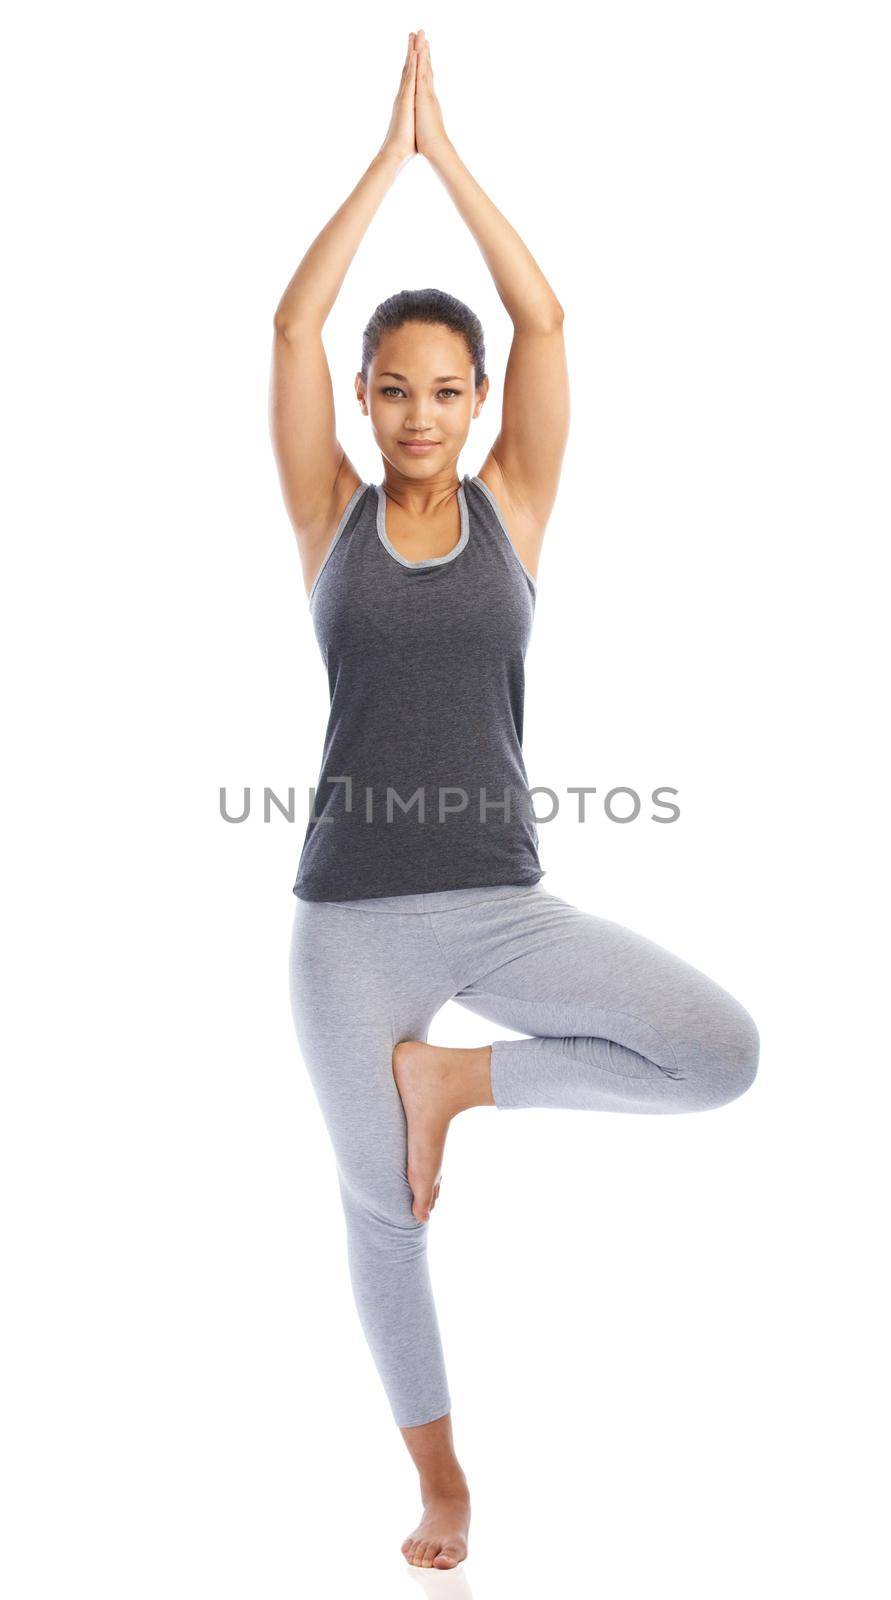 Yoga is calming and relaxing. A beautiful young woman doing a yoga pose against a white background. by YuriArcurs